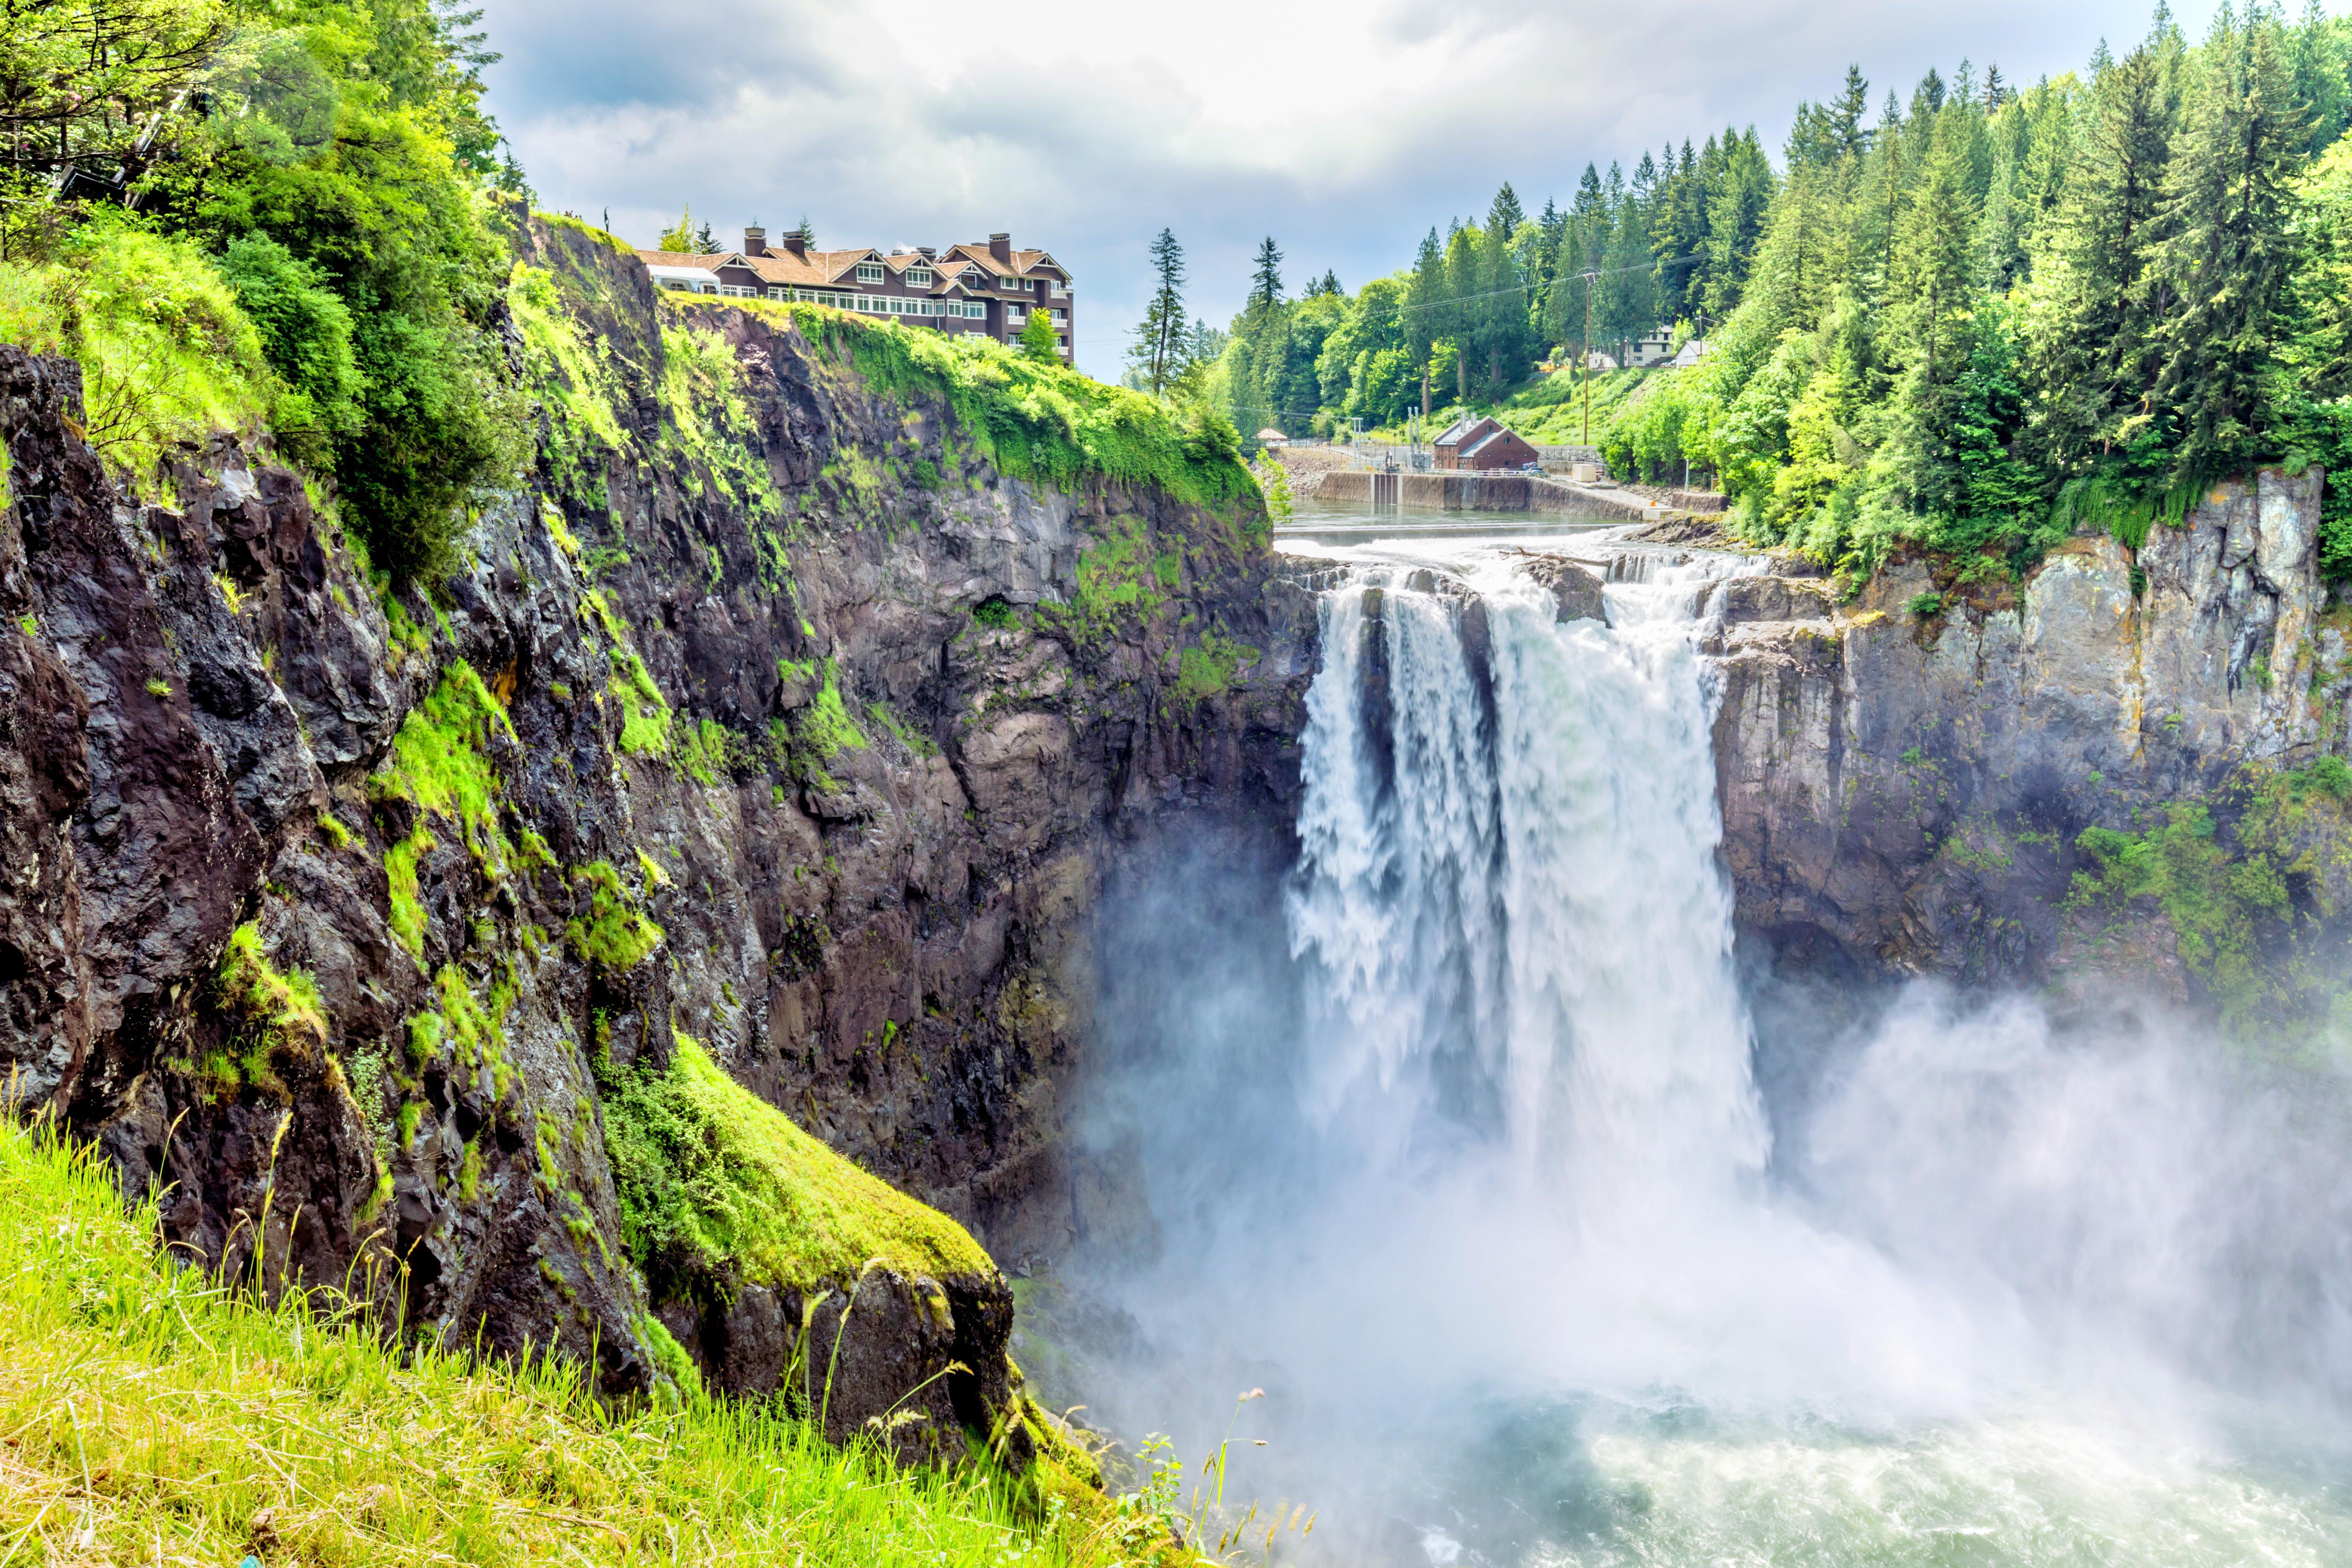 Snoqualmie Falls Attraction Reviews Snoqualmie Falls Tickets Snoqualmie Falls Discounts Snoqualmie Falls Transportation Address Opening Hours Attractions Hotels And Food Near Snoqualmie Falls Trip Com